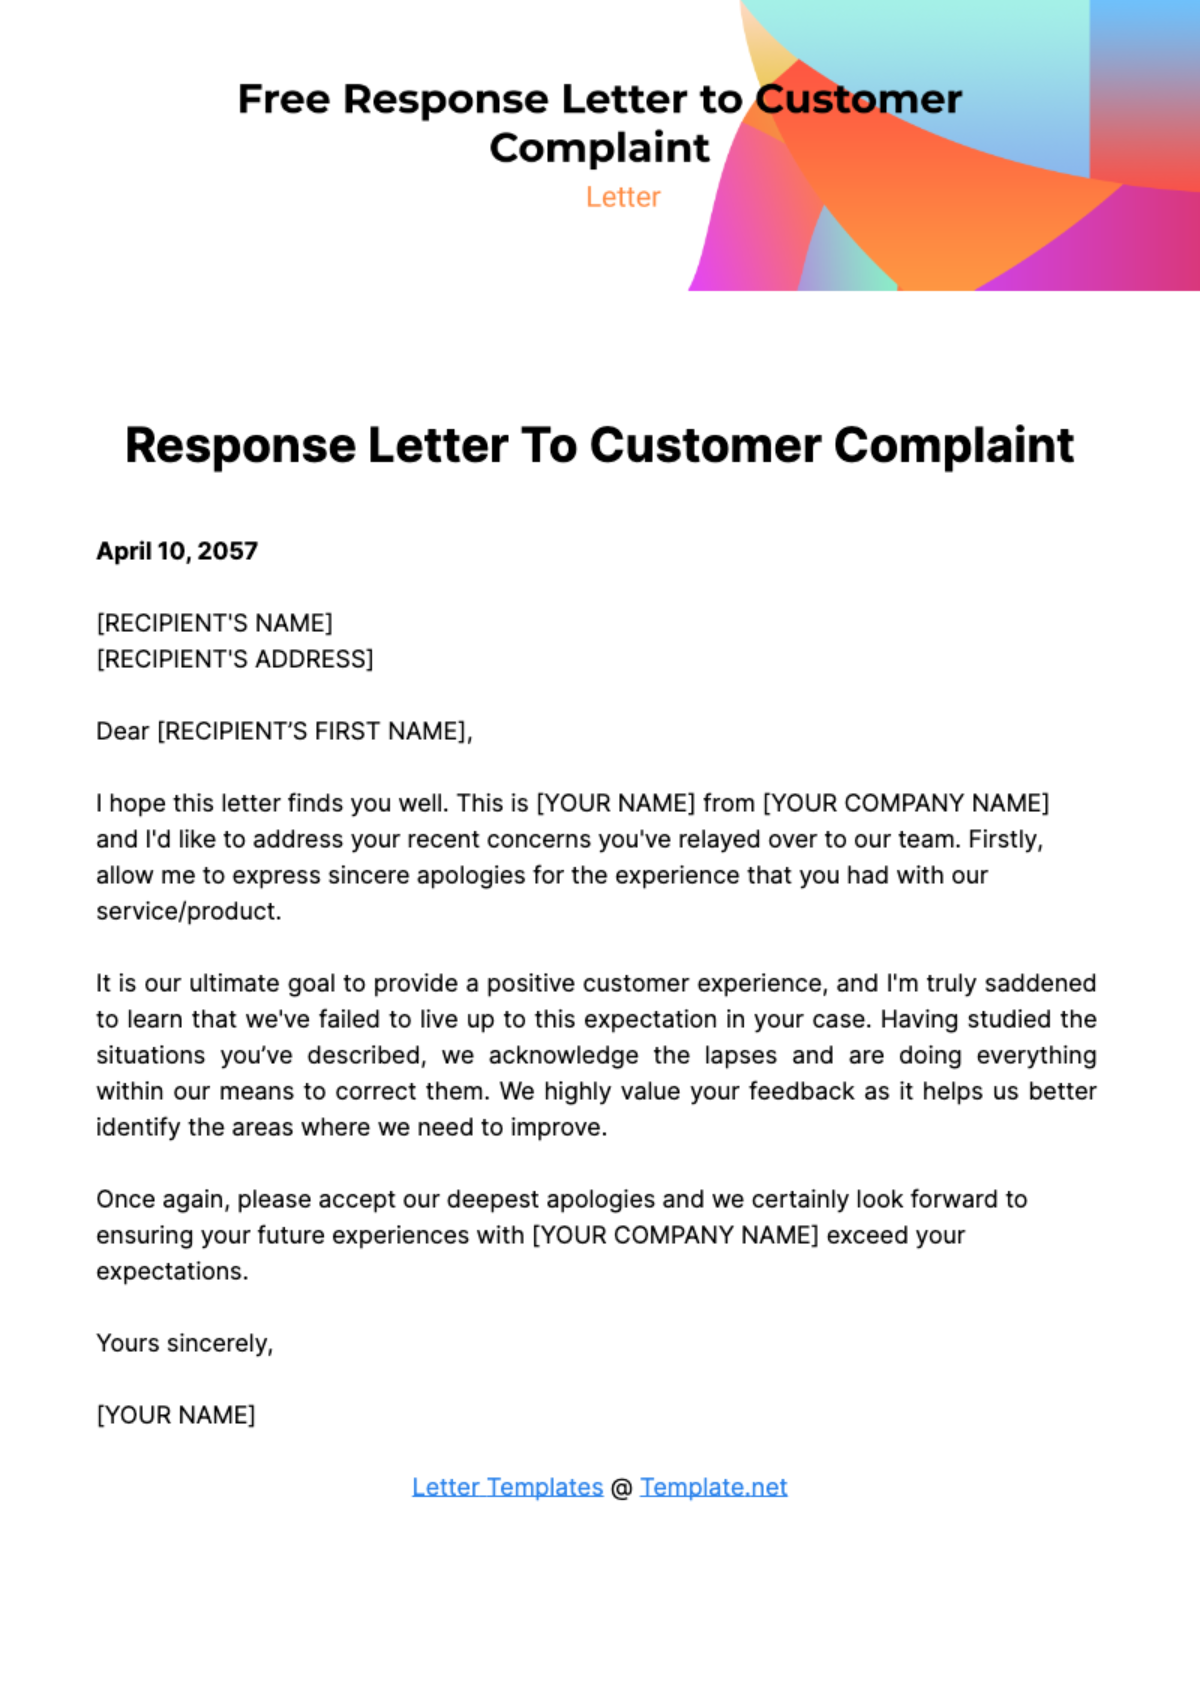 Free Response Letter to Customer Complaint Template